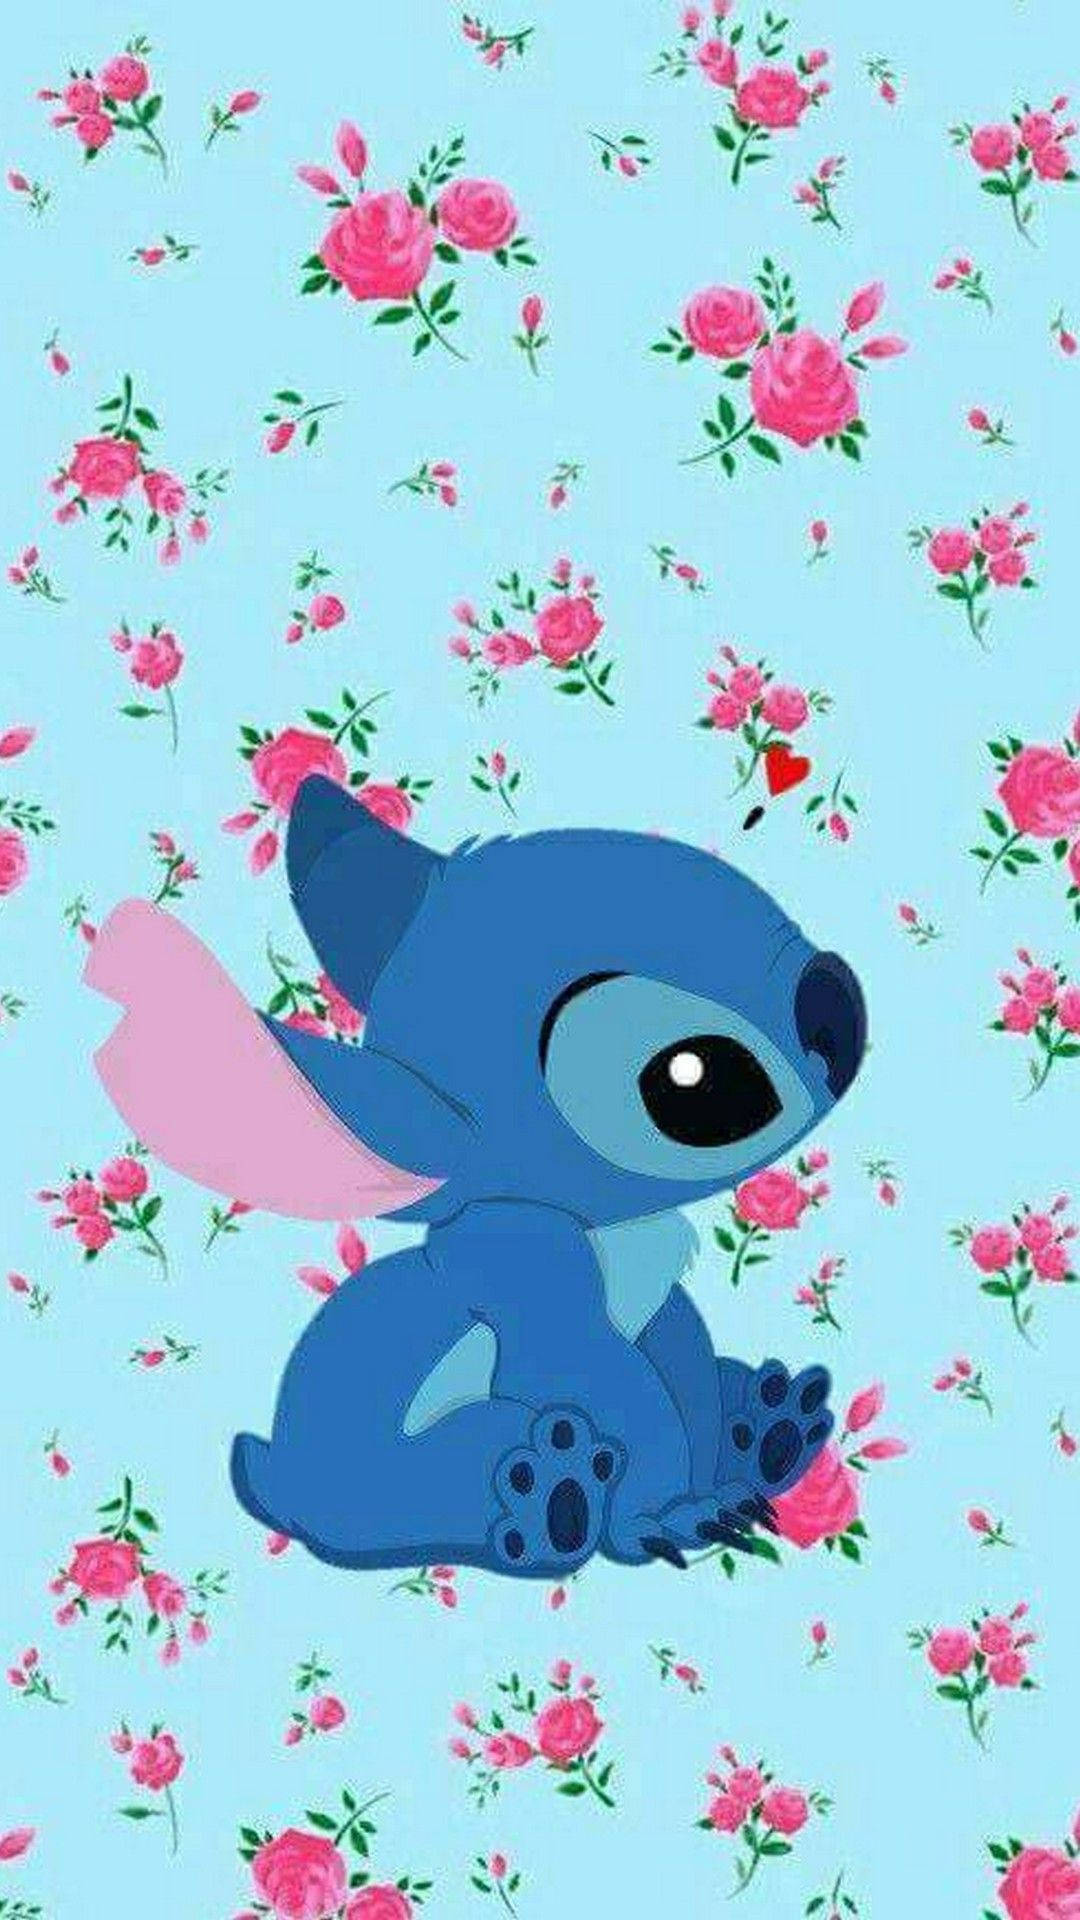 Stitch with a Bouquet of Pink Roses Wallpaper